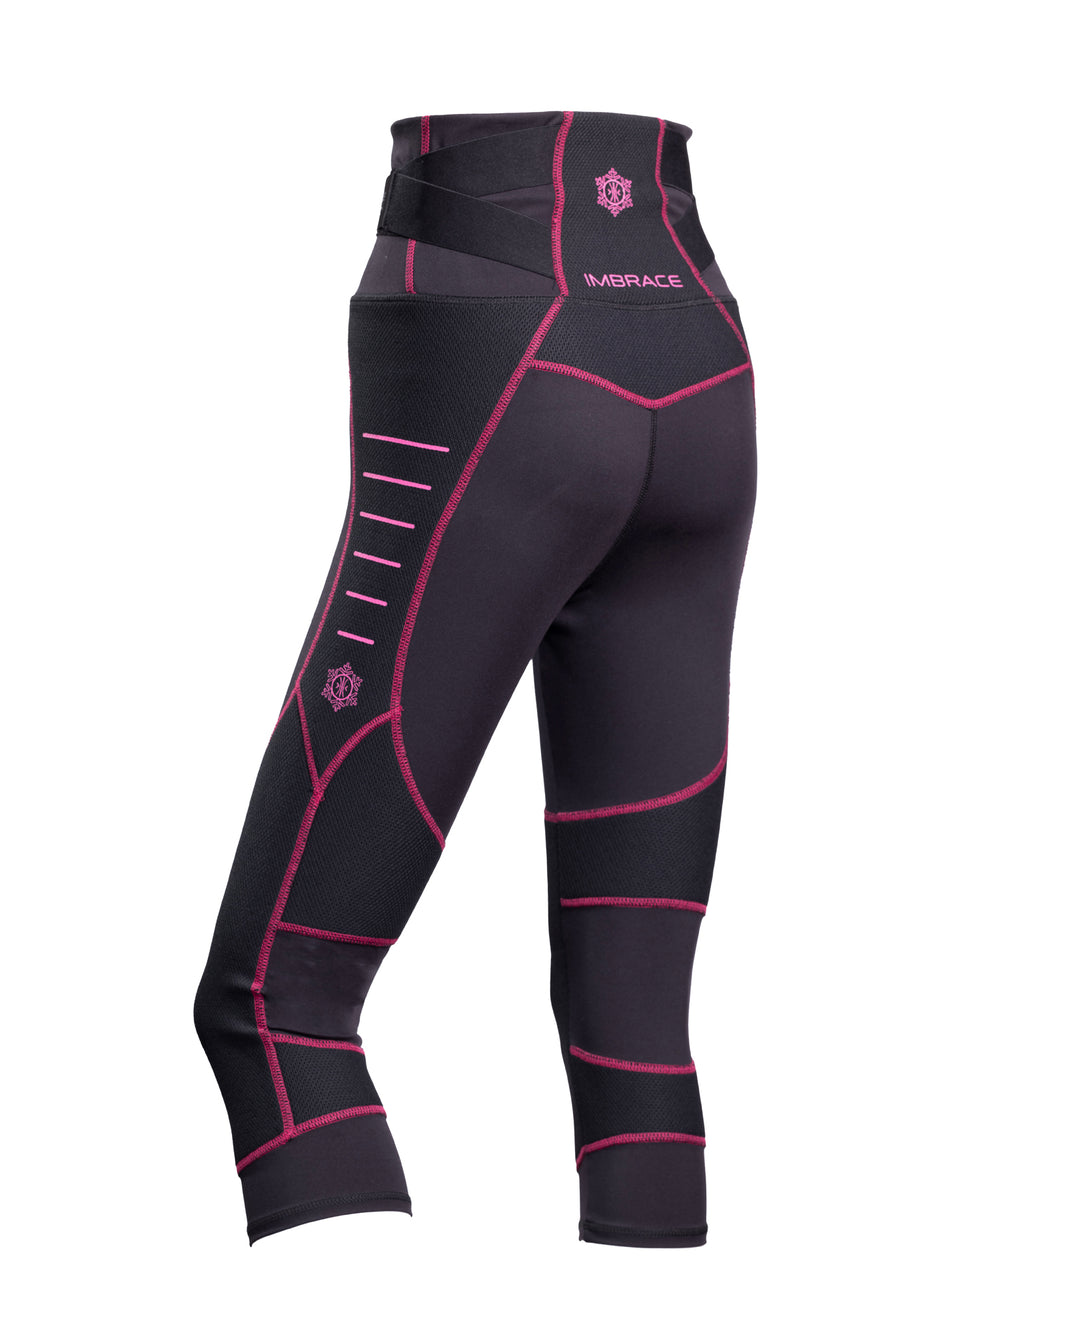 Men's Dynamic Active Recovery Legging